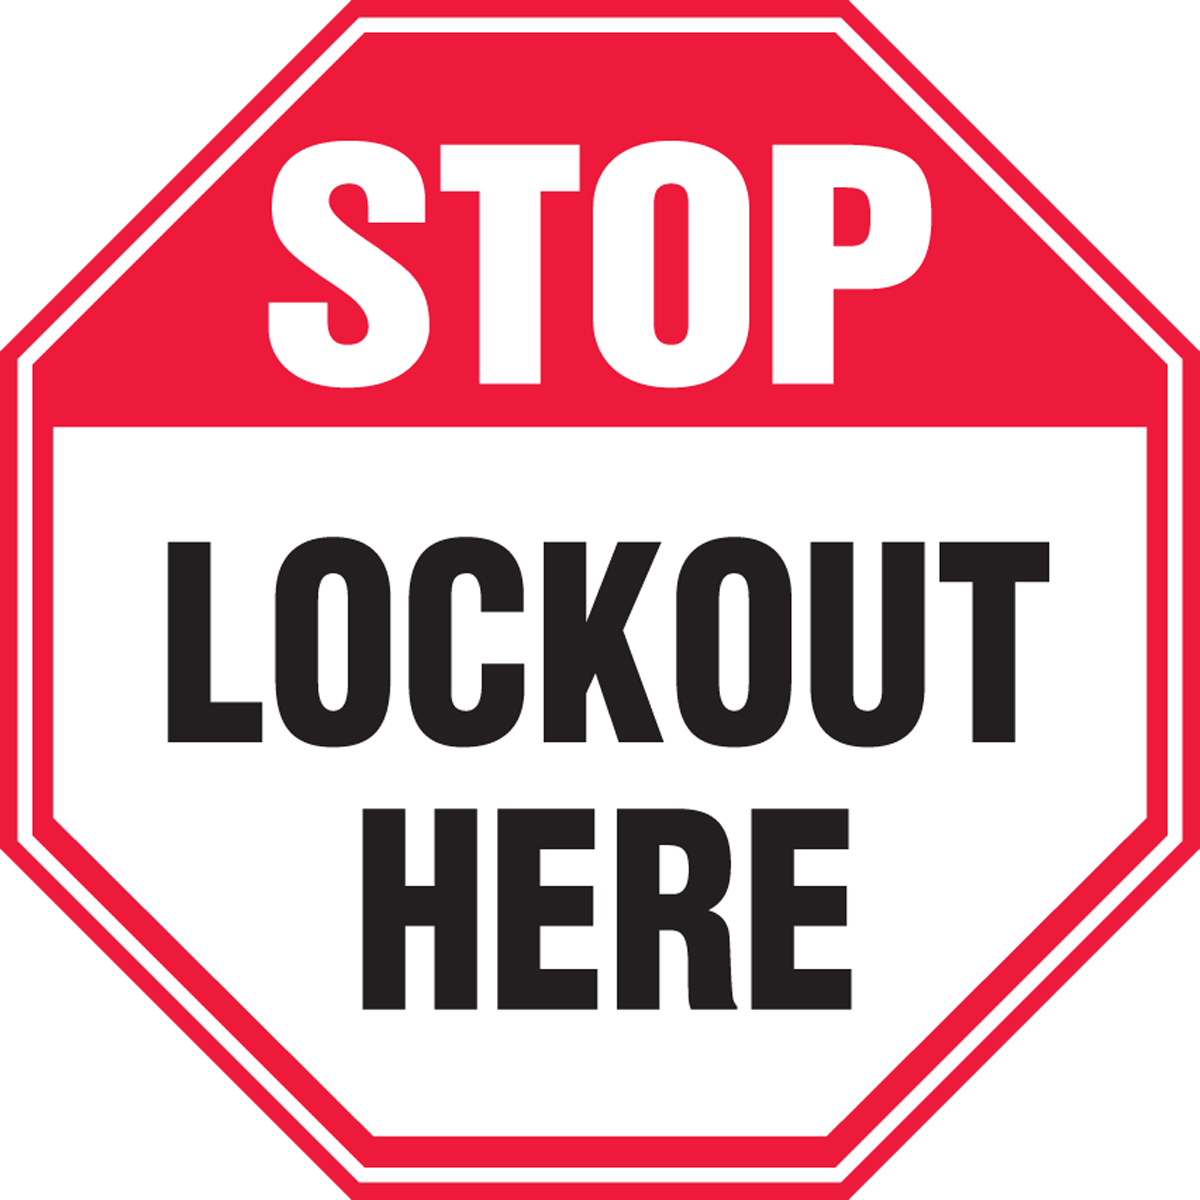 STOP LOCKOUT HERE